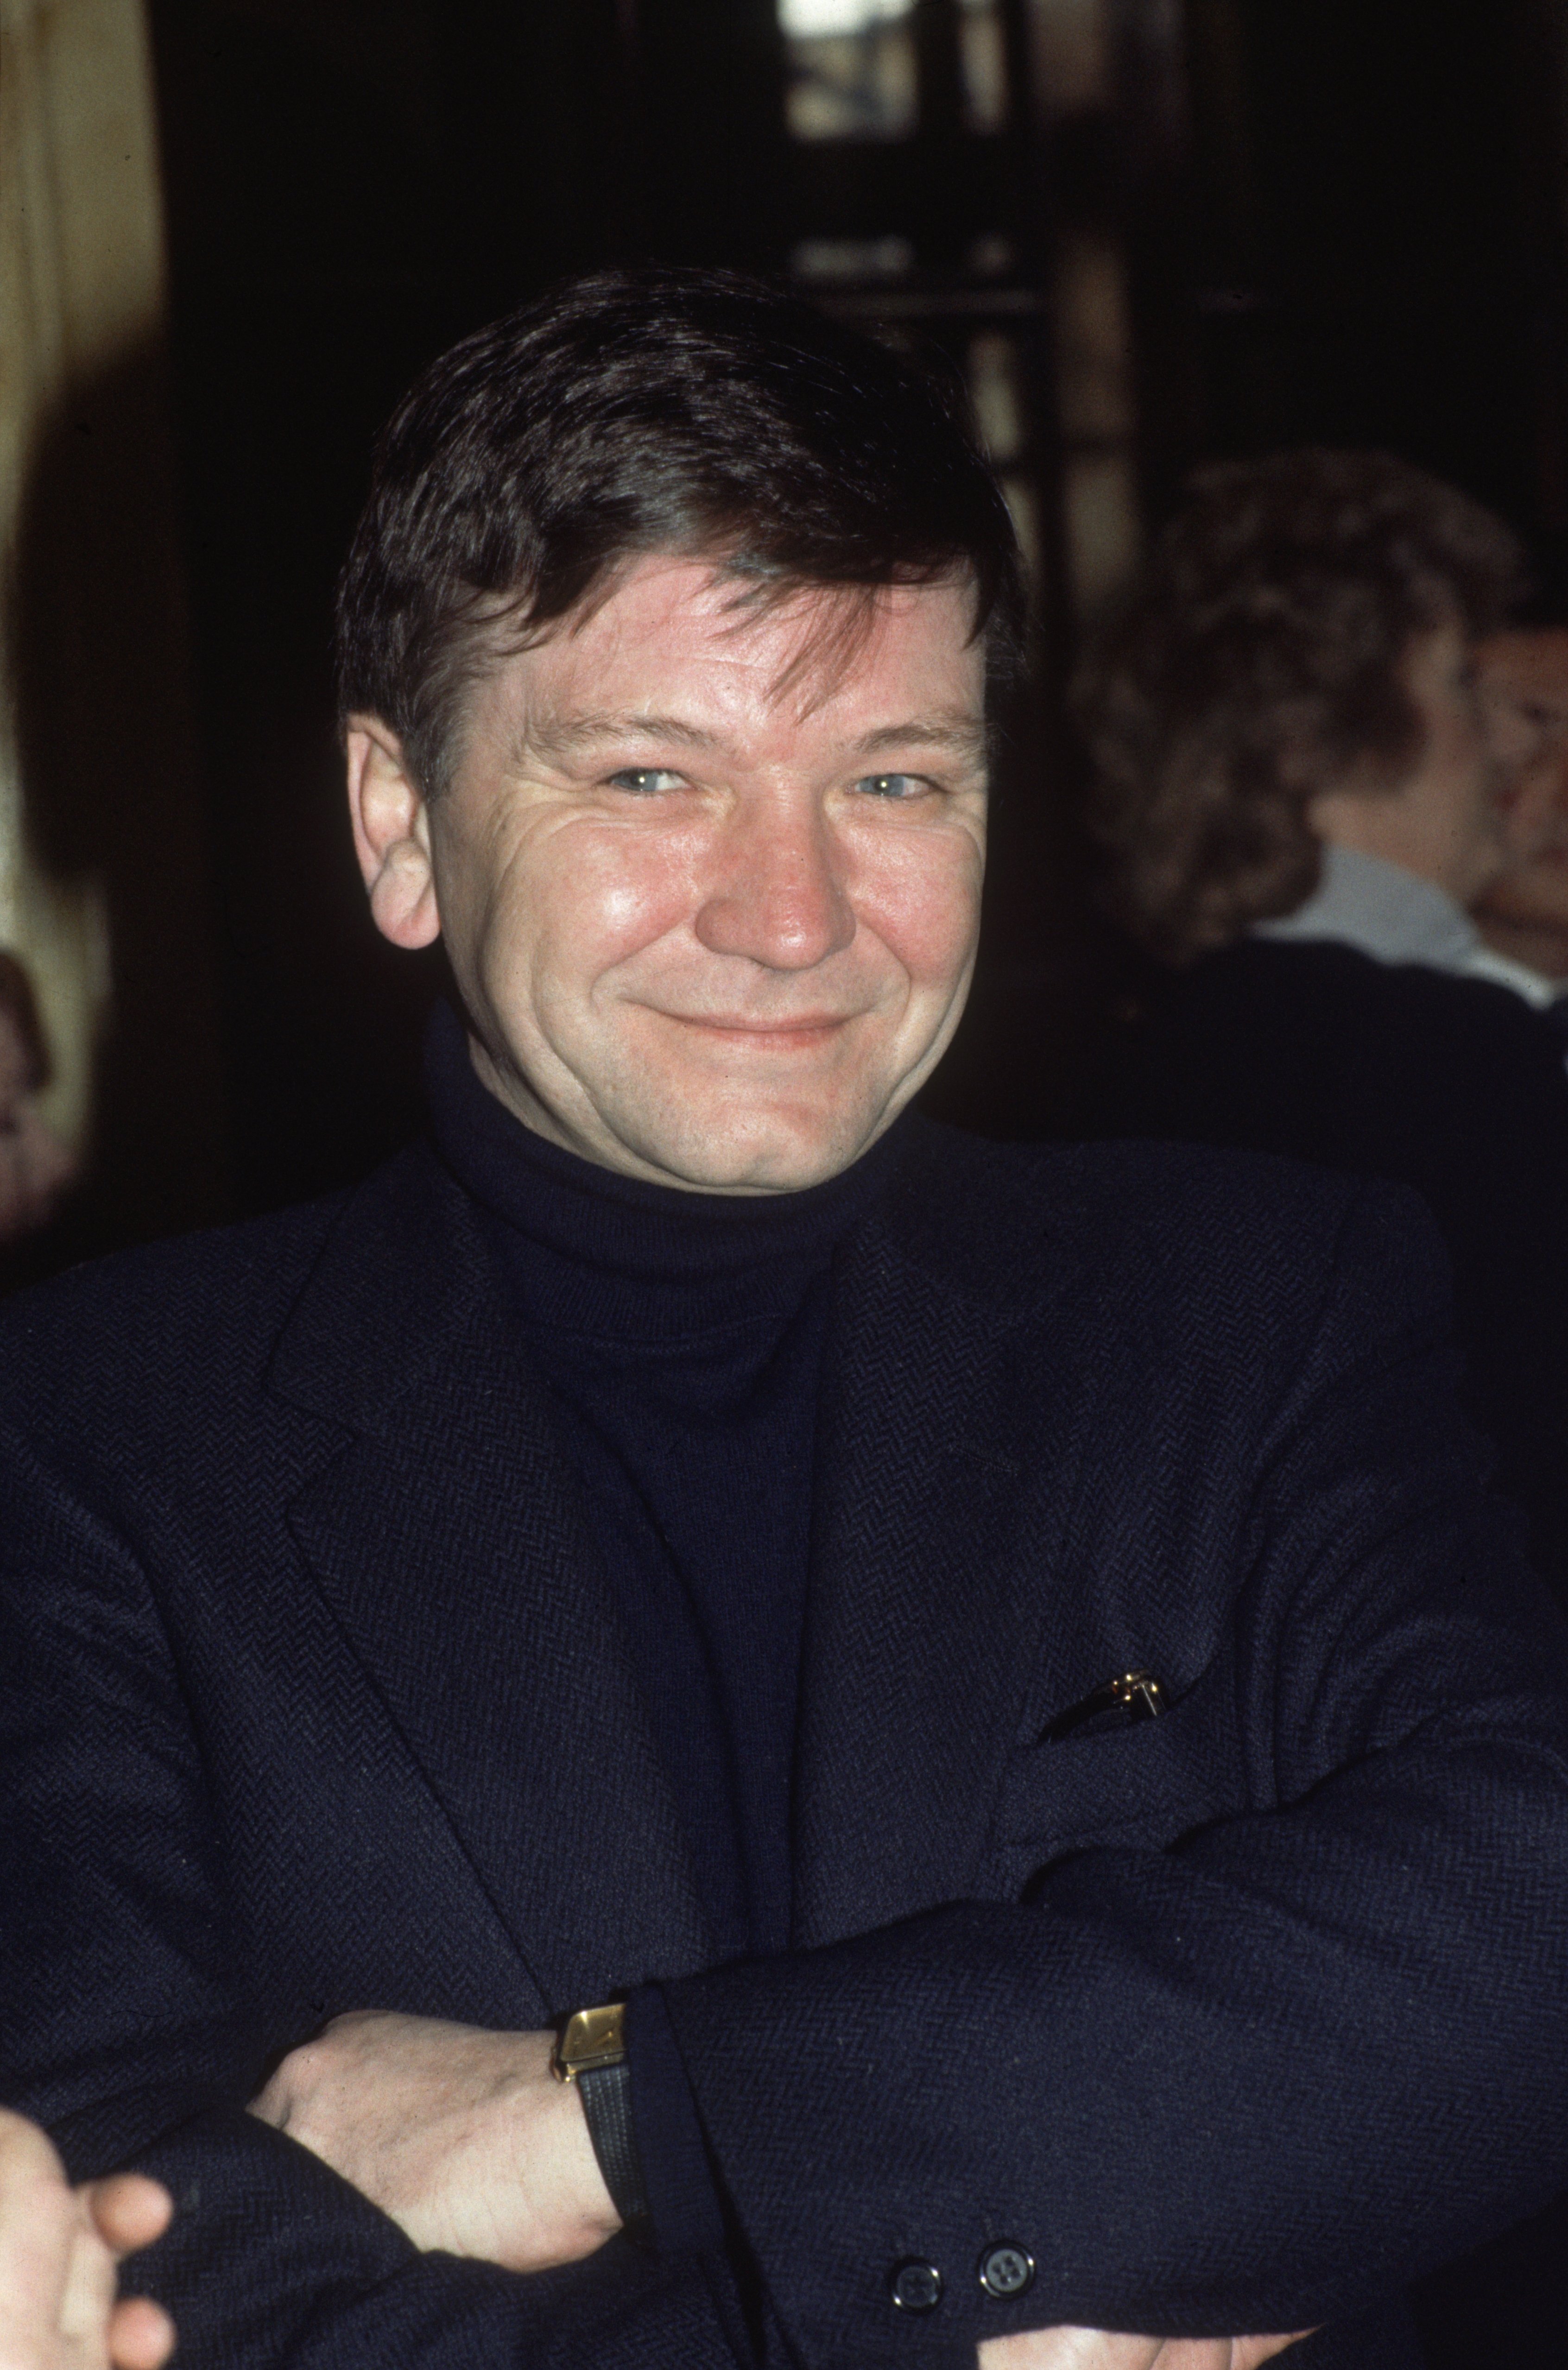 Michael Williams photographed at the Theatre Royal on January 1, 1984 in Drury Lane, London ┃Source: Getty Images